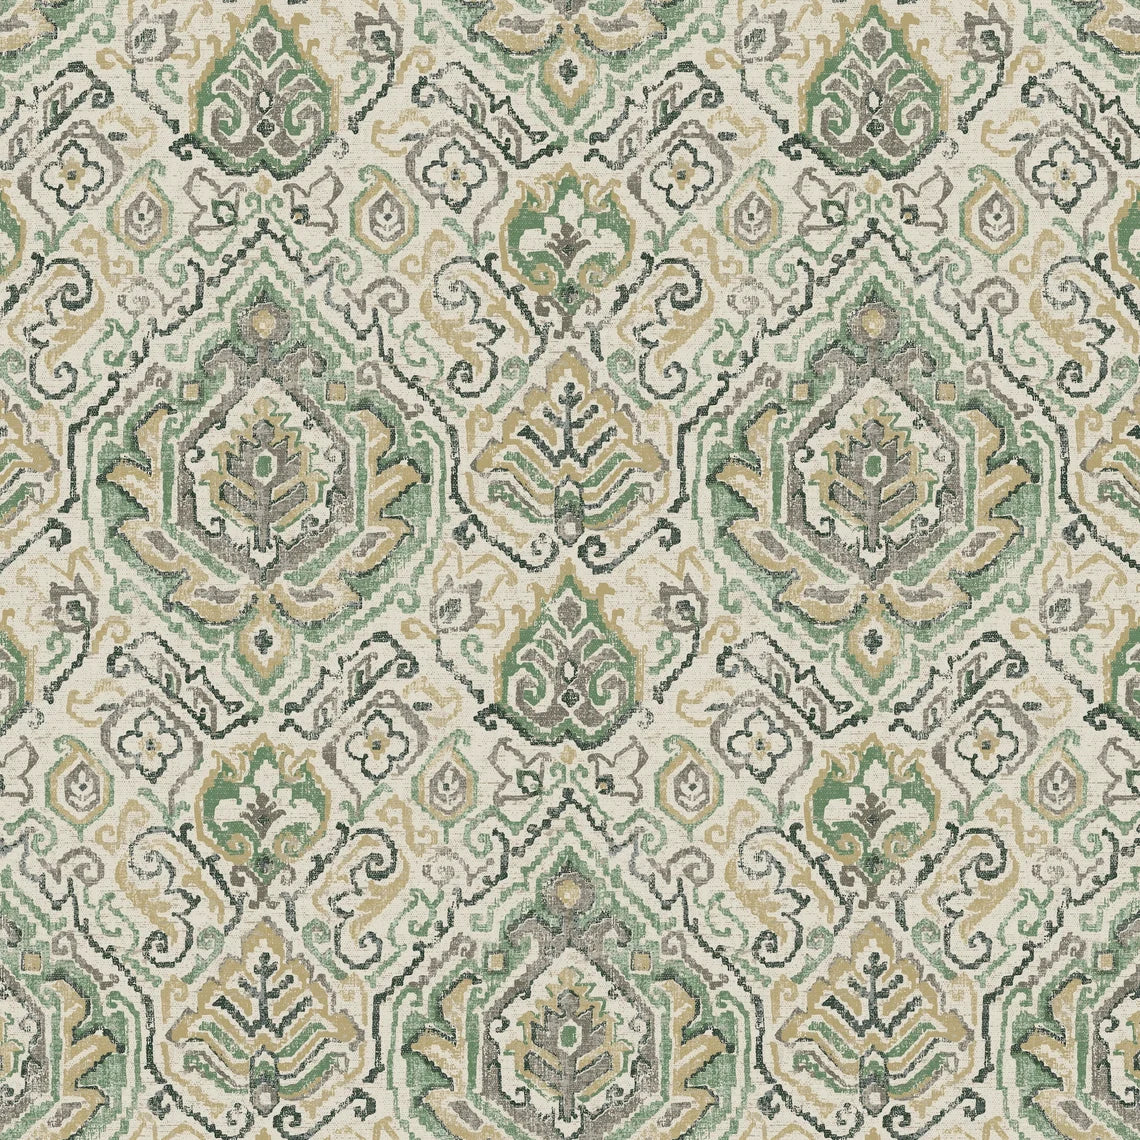 Round Tablecloth in Cathell Meadow Green Medallion Weathered Persian Rug Design- Large Scale